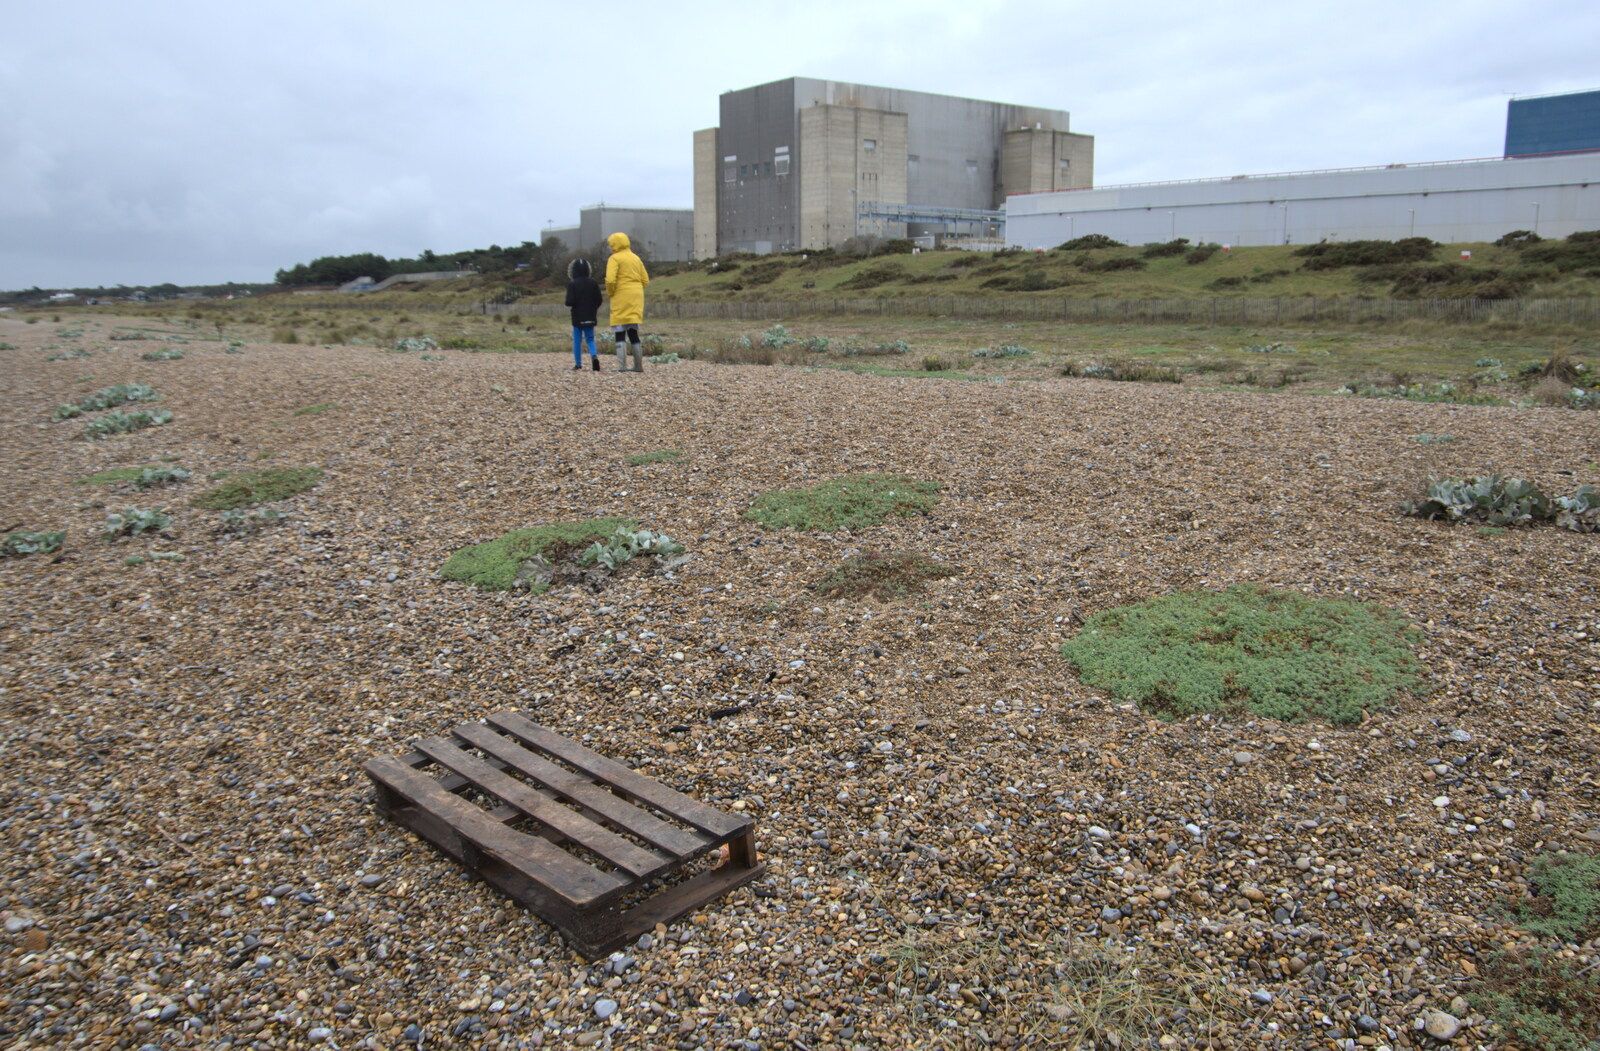 A discarded pallet from Sizewell Beach and the Lion Pub, Sizewell and Theberton, Suffolk - 4th October 2020